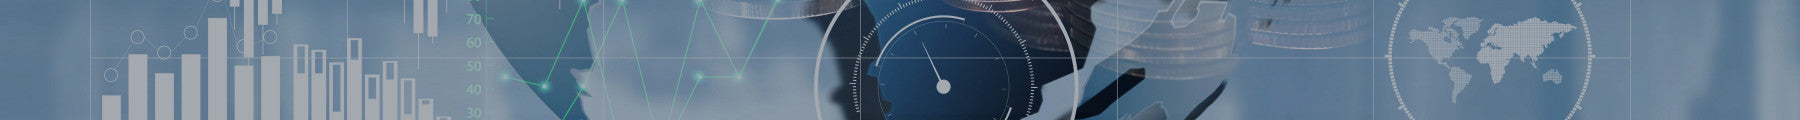 Variation of blue world map, clock, coins, finance graph abstract images 